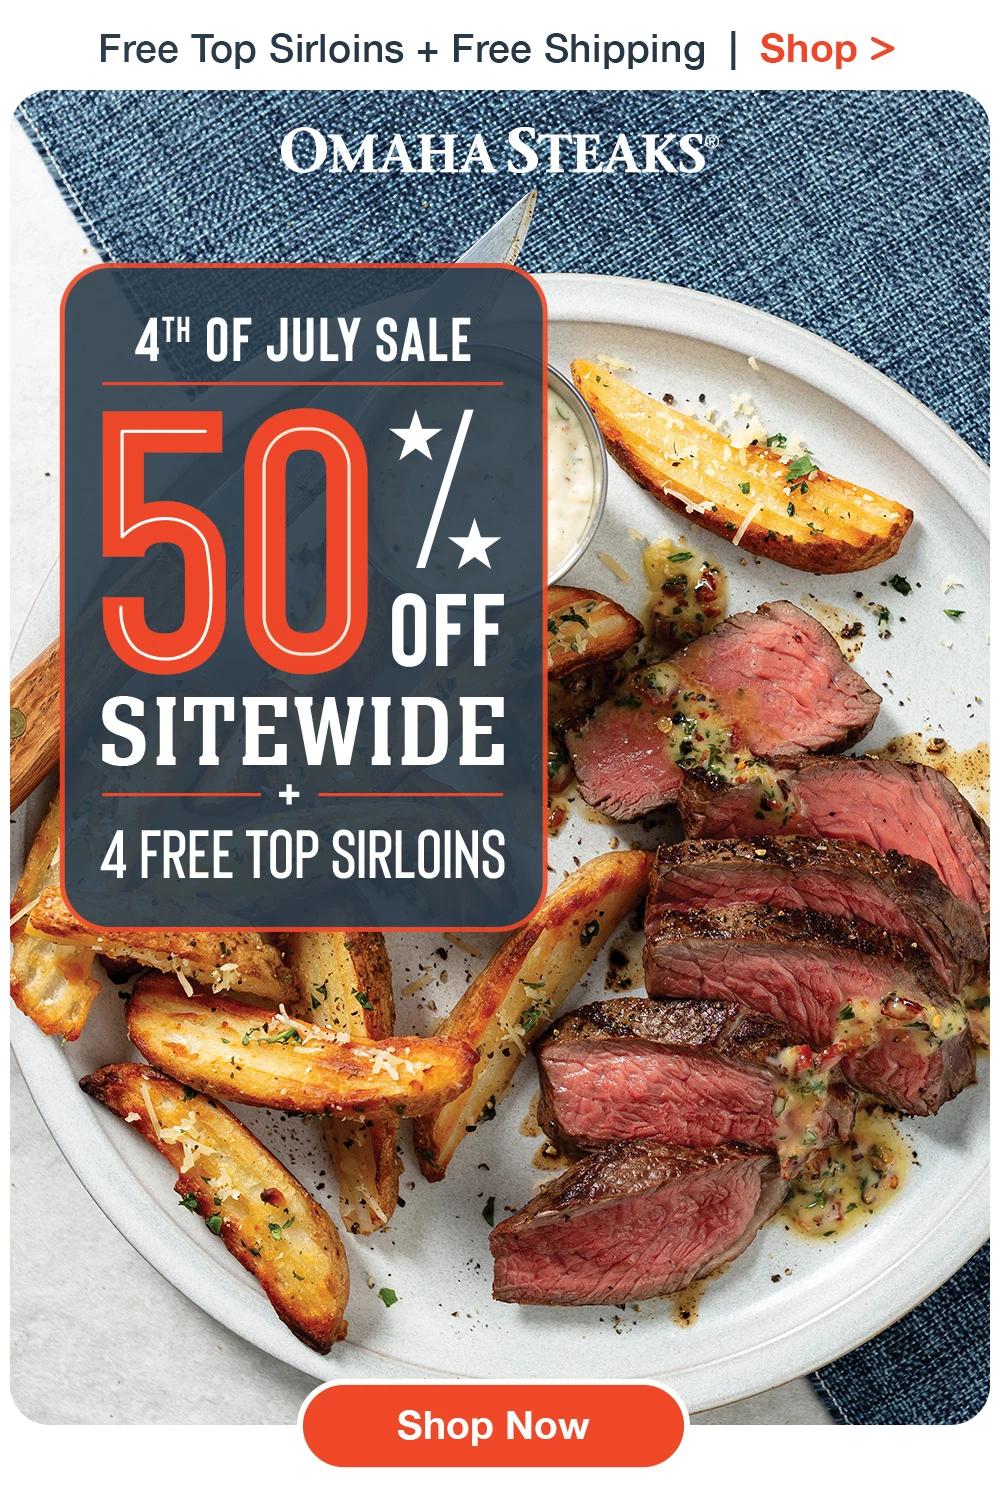 Free Top Sirloins + Free Shipping | Shop >  OMAHA STEAKS | 4TH OF JULY SALE 50% SITEWIDE 4 FREE TOP SIRLOINS || Shop Now